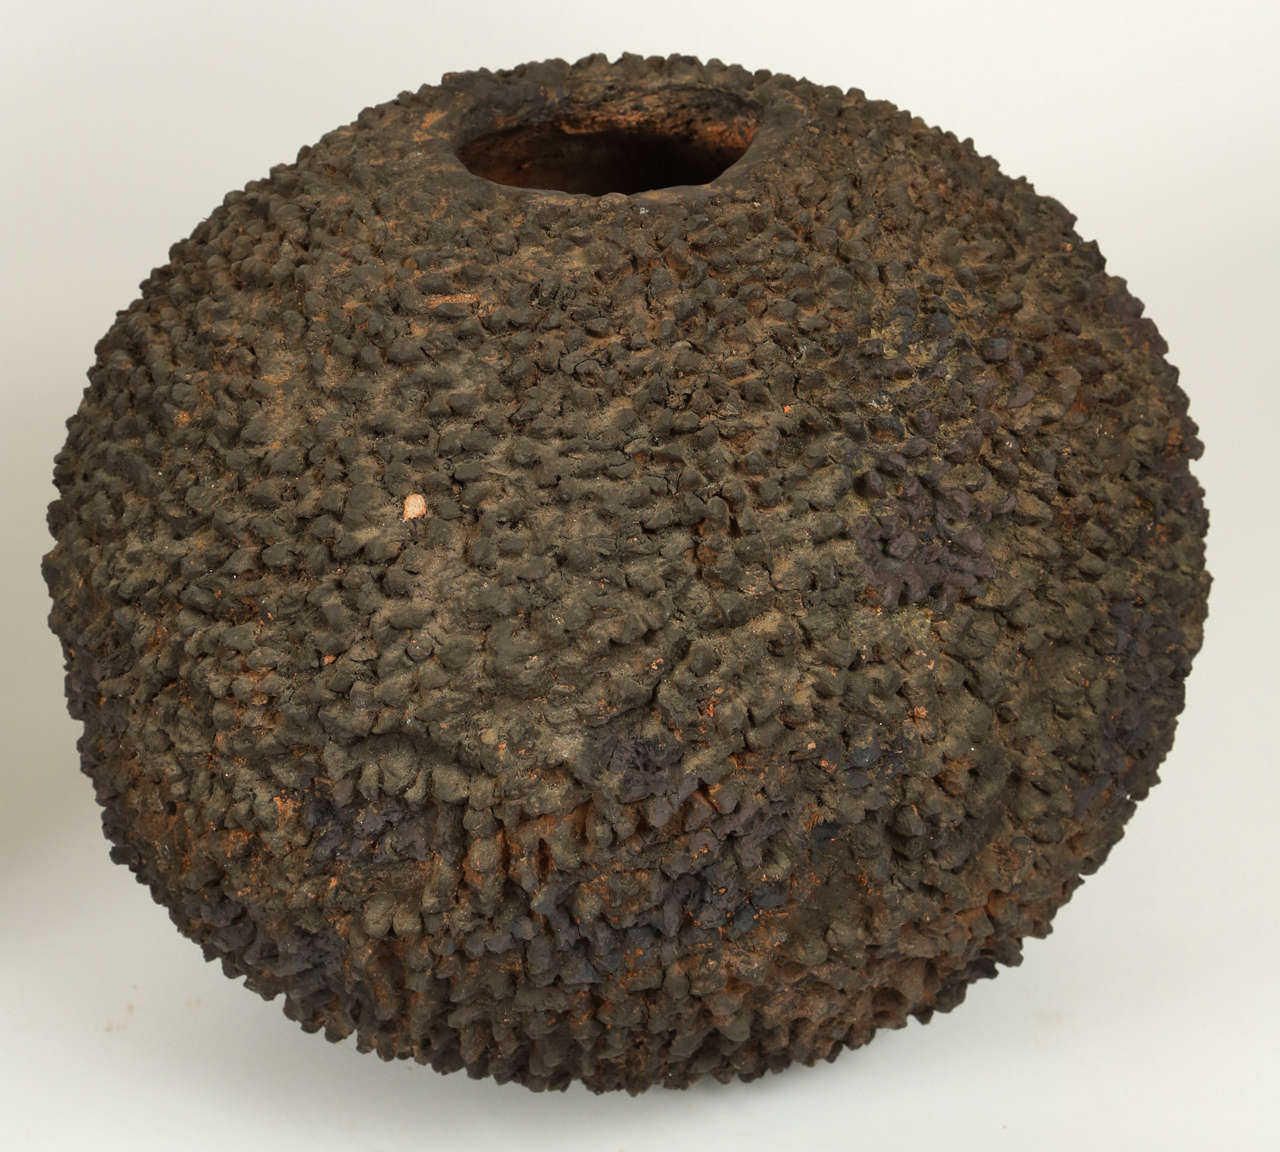 Lidded volcanic clay Lobi pot densely and organically covered with points.  

The Lobi are an ethnic group that originated in what is today Ghana. Starting around 1770 many of the Lobi migrated into southern Burkina Faso. Currently the group